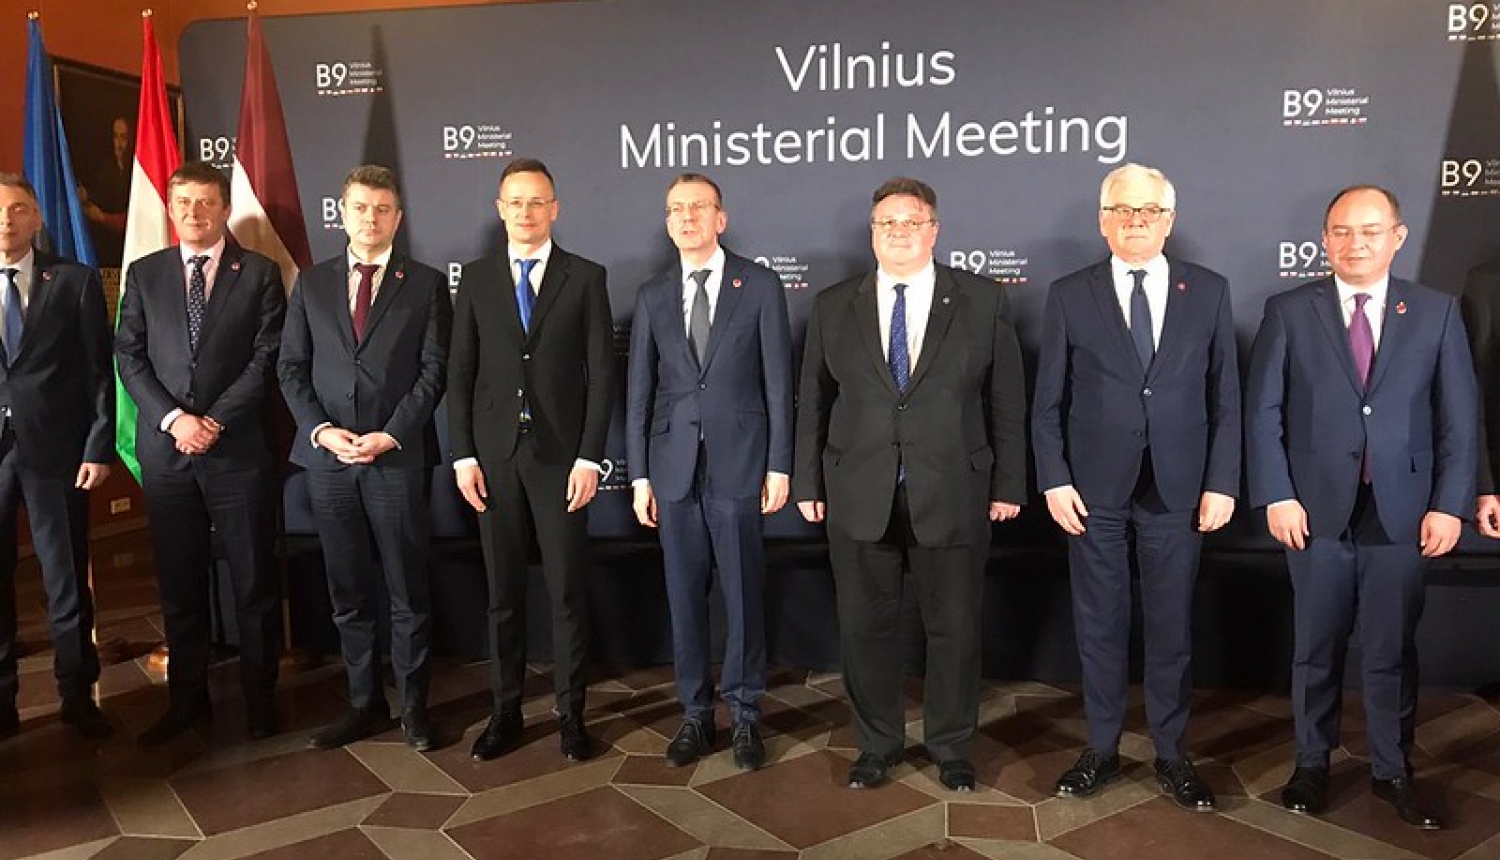 The Bucharest Nine Foreign Ministers of NATO gather in Vilnius